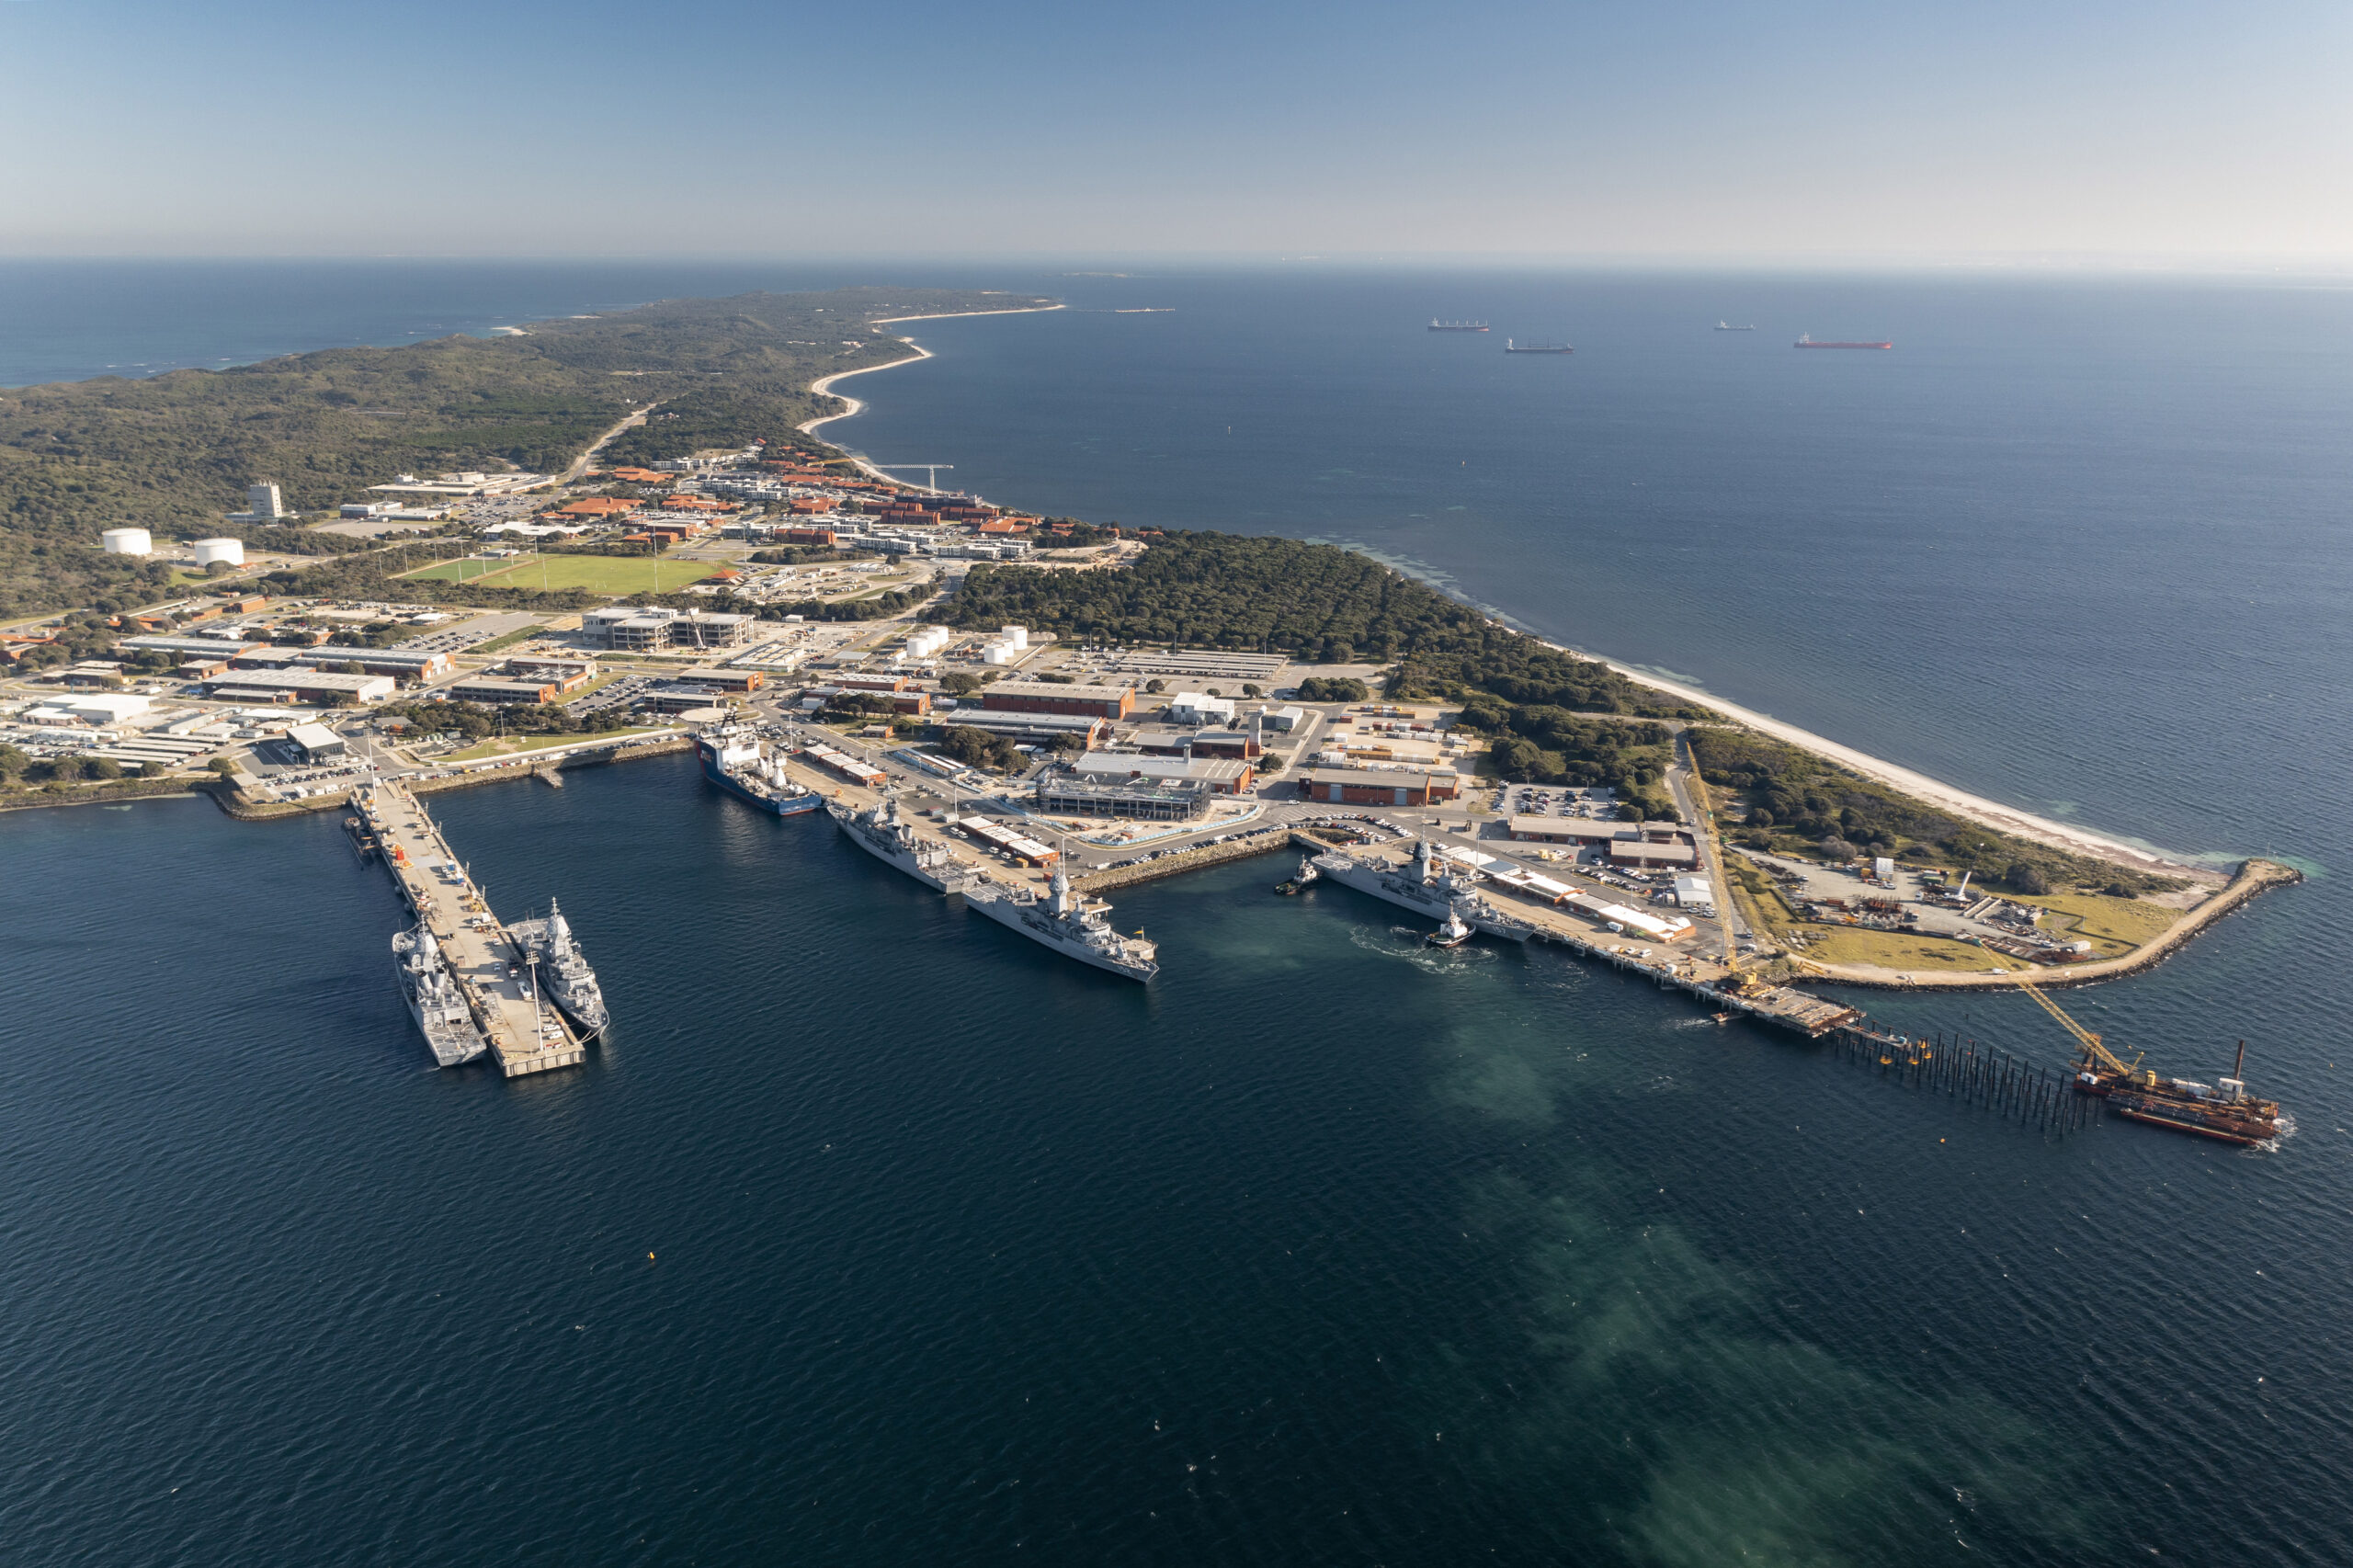 The Royal Australian Navy frigate HMAS <em>Perth</em> berths alongside Fleet Base West in September 2022, following a Regional Presence Deployment in which the ship engaged with a number of regional allies in various exercises and port visits. <em>Australian Department of Defense</em>